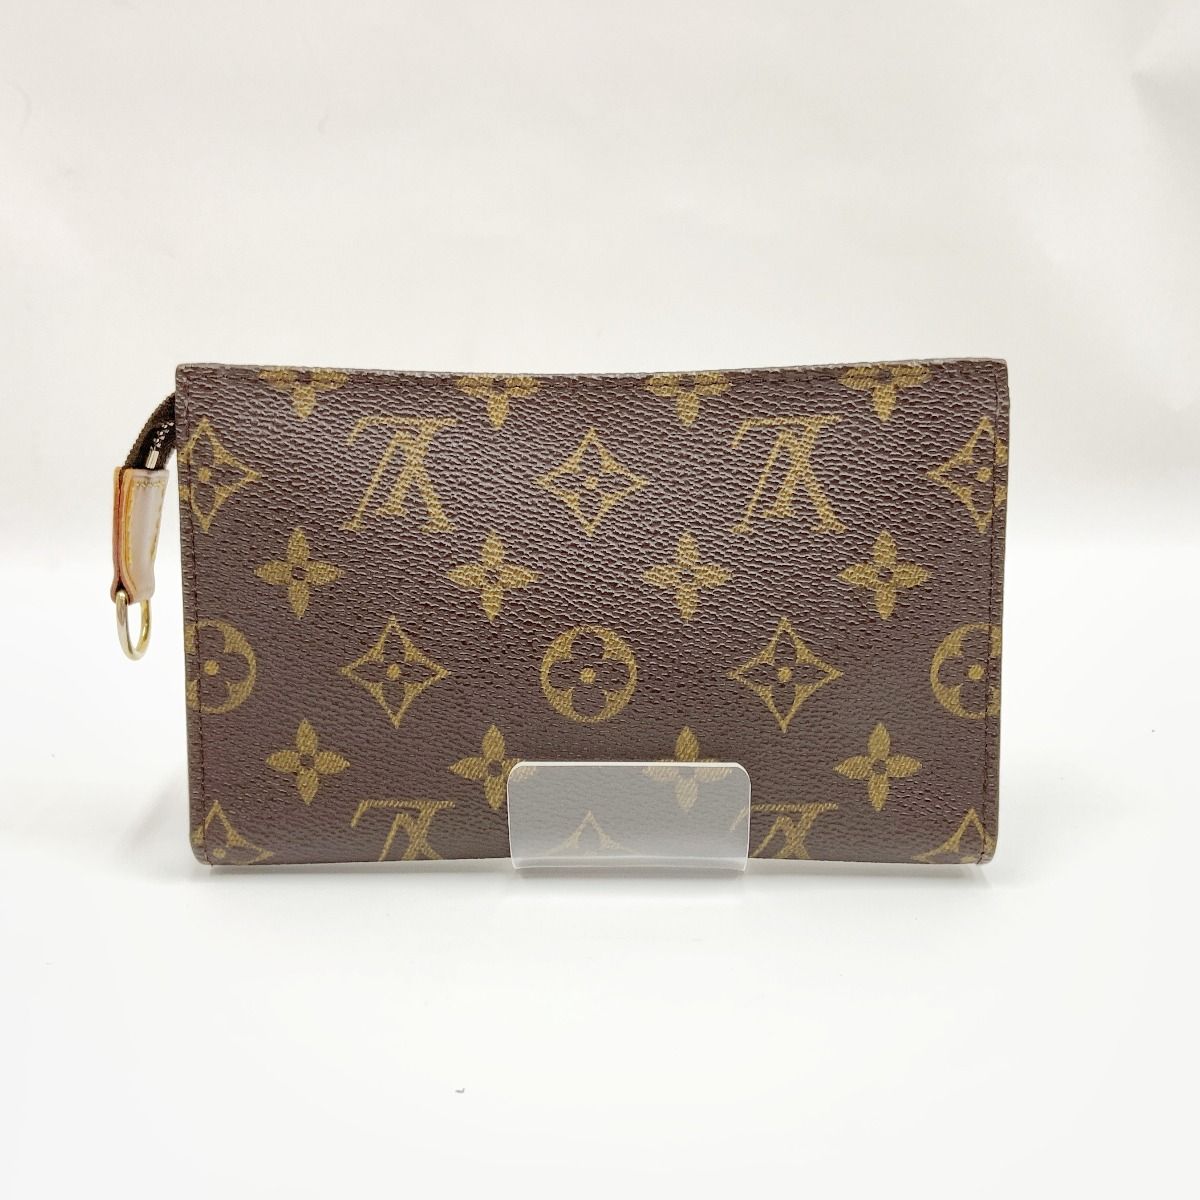 〇〇LOUIS VUITTON ルイヴィトン モノグラム バケットPM 付属品 ポーチ